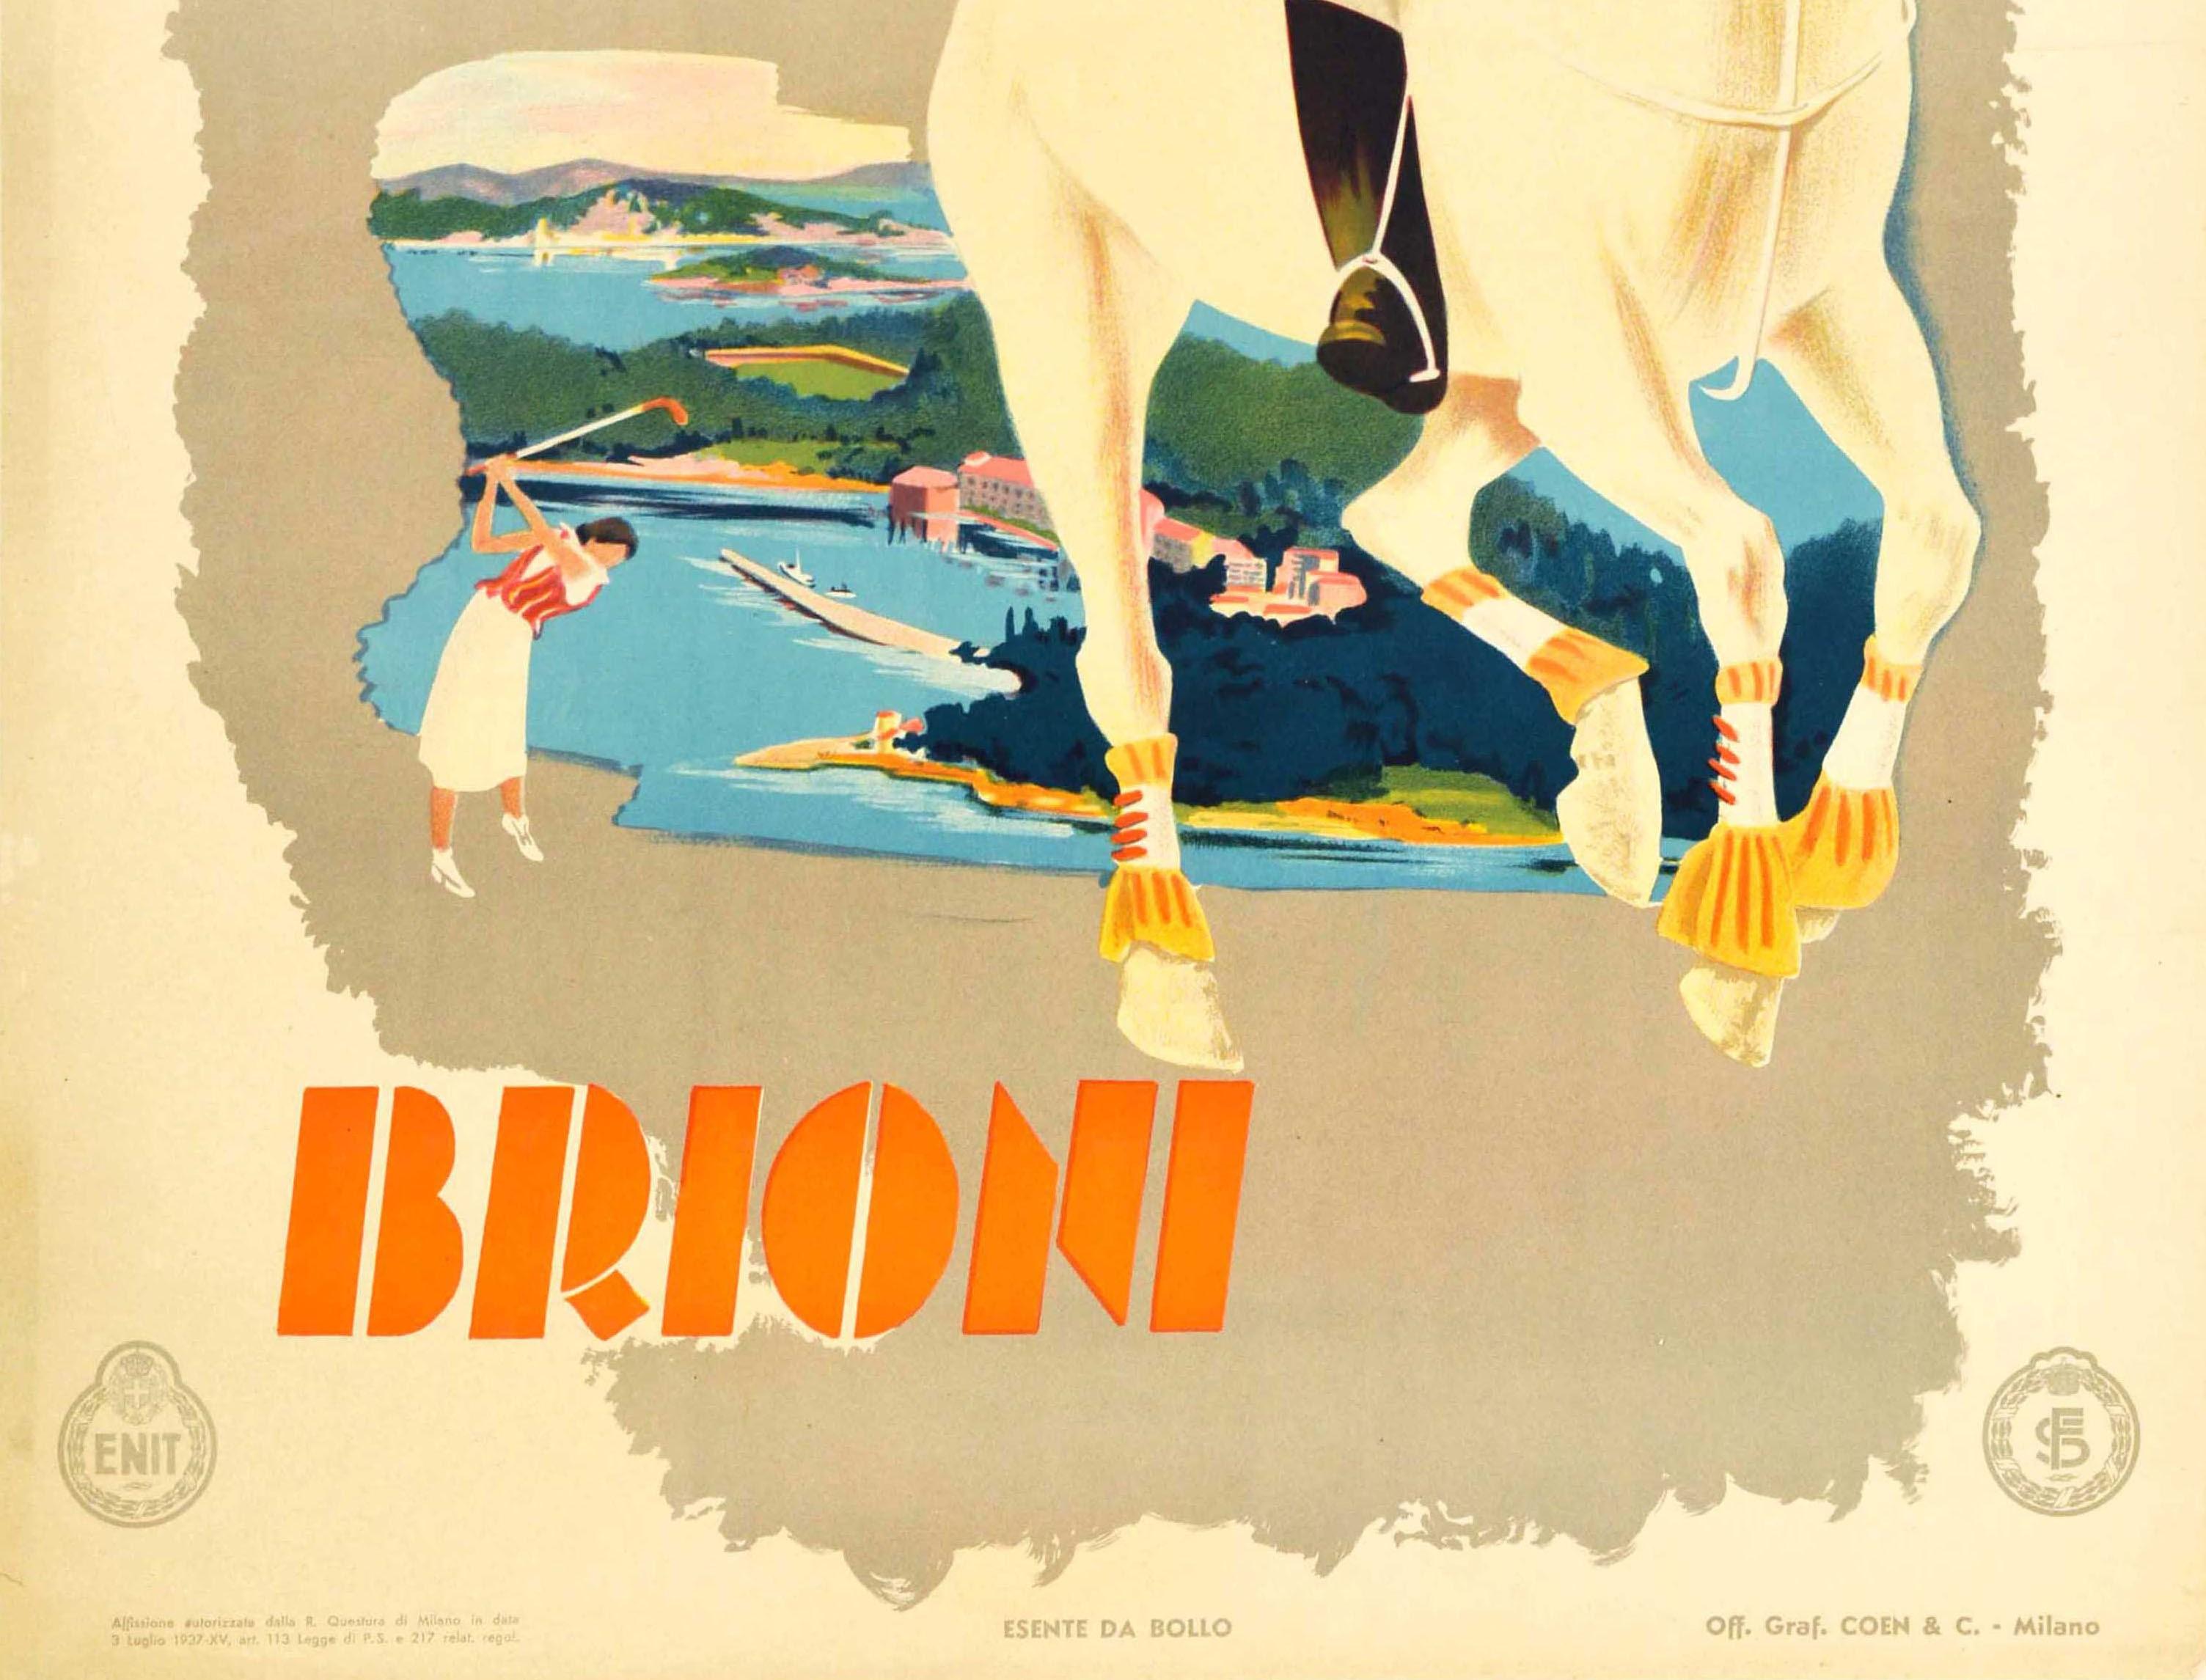 Original Vintage ENIT Travel Poster Brioni Italy Polo Sailing Golf Sport Design - Art Deco Print by Unknown